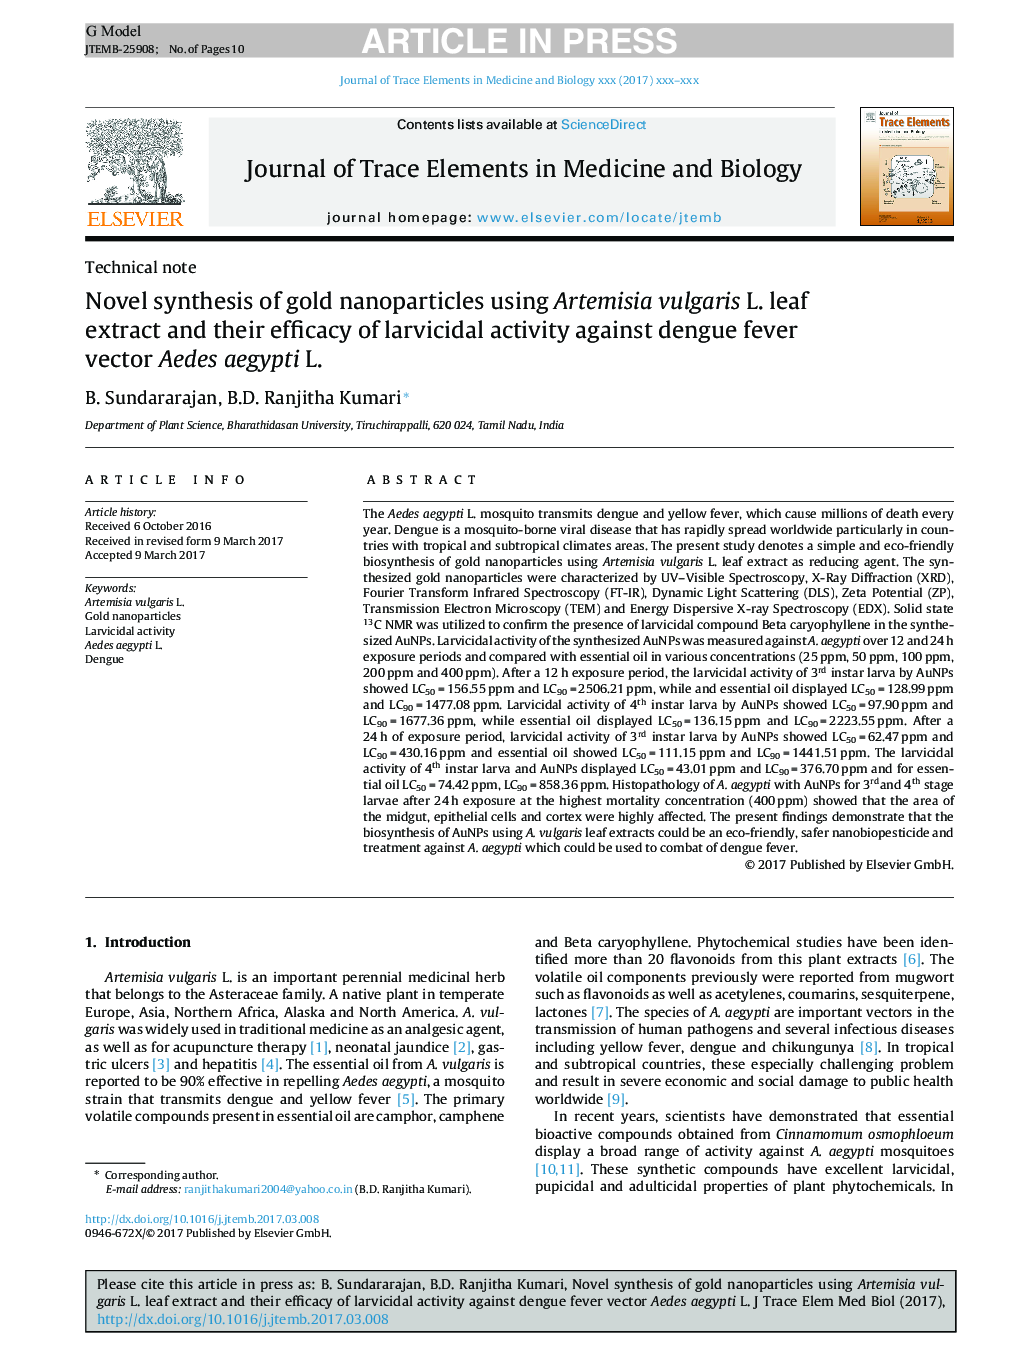 Novel synthesis of gold nanoparticles using Artemisia vulgaris L. leaf extract and their efficacy of larvicidal activity against dengue fever vector Aedes aegypti L.